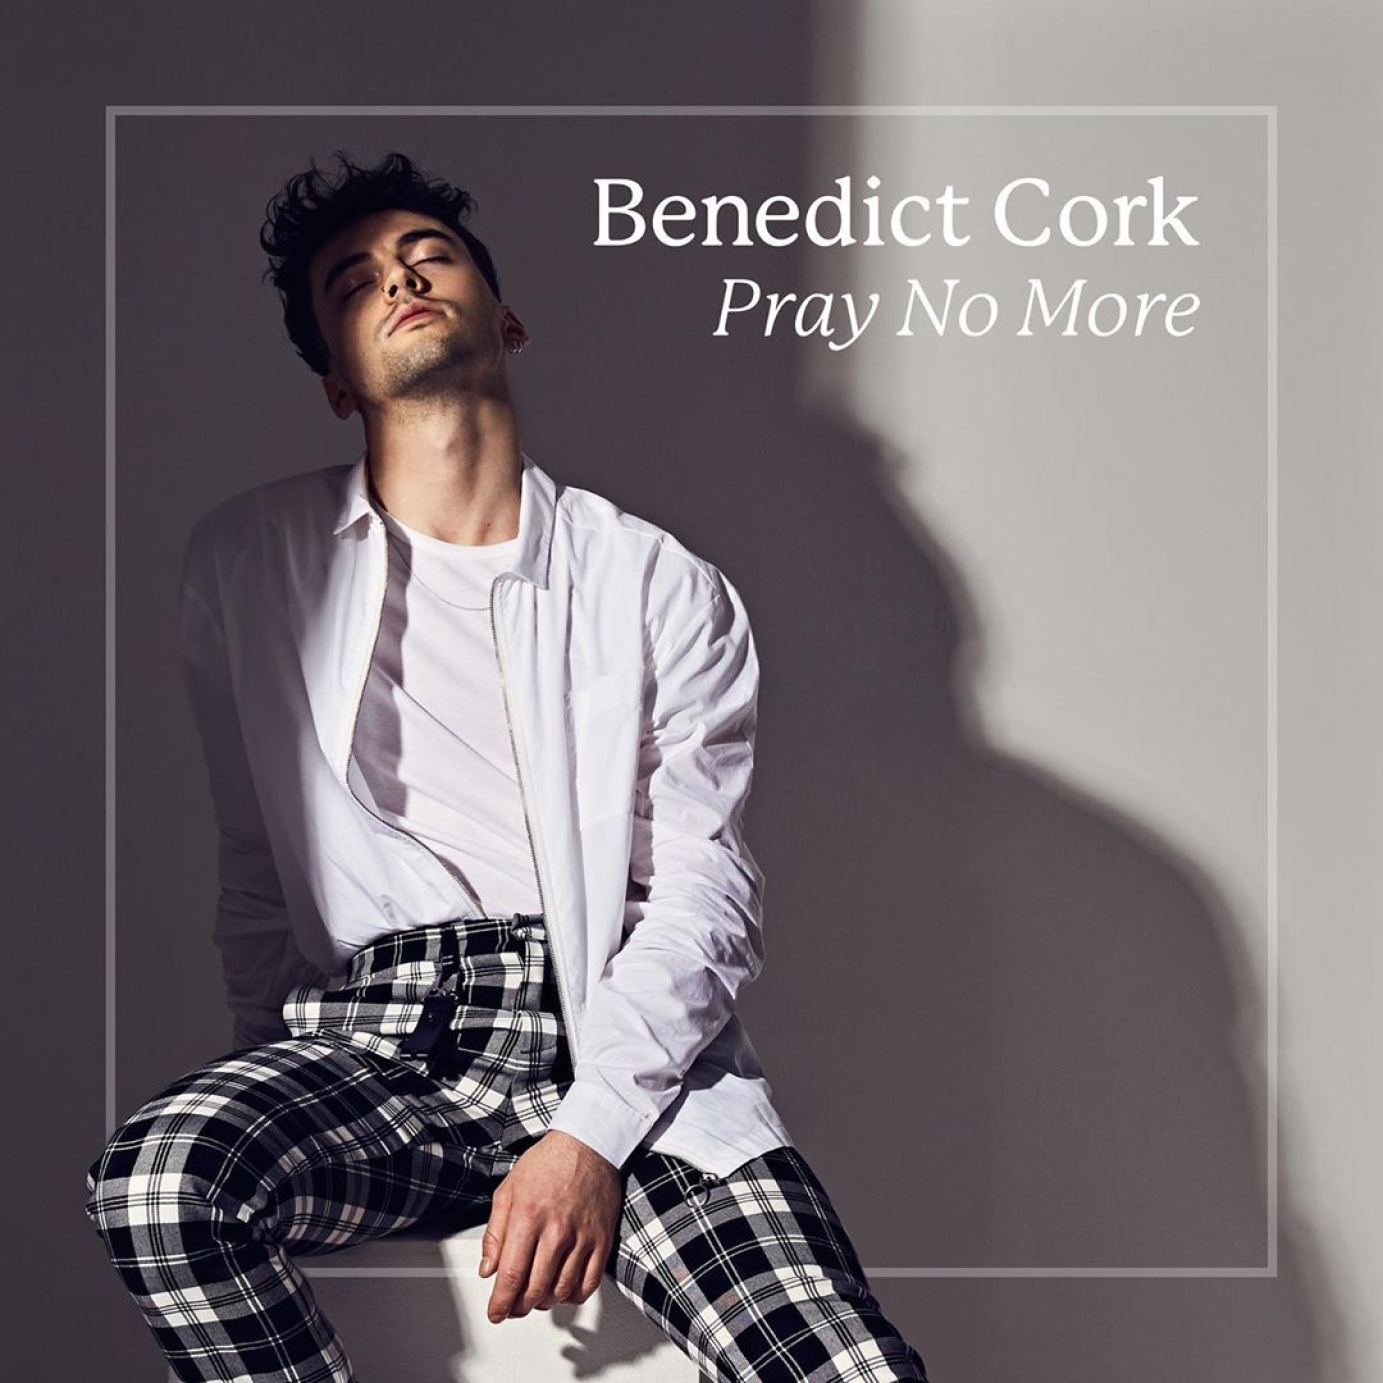 Photography for Benedict Cork by ianhippo